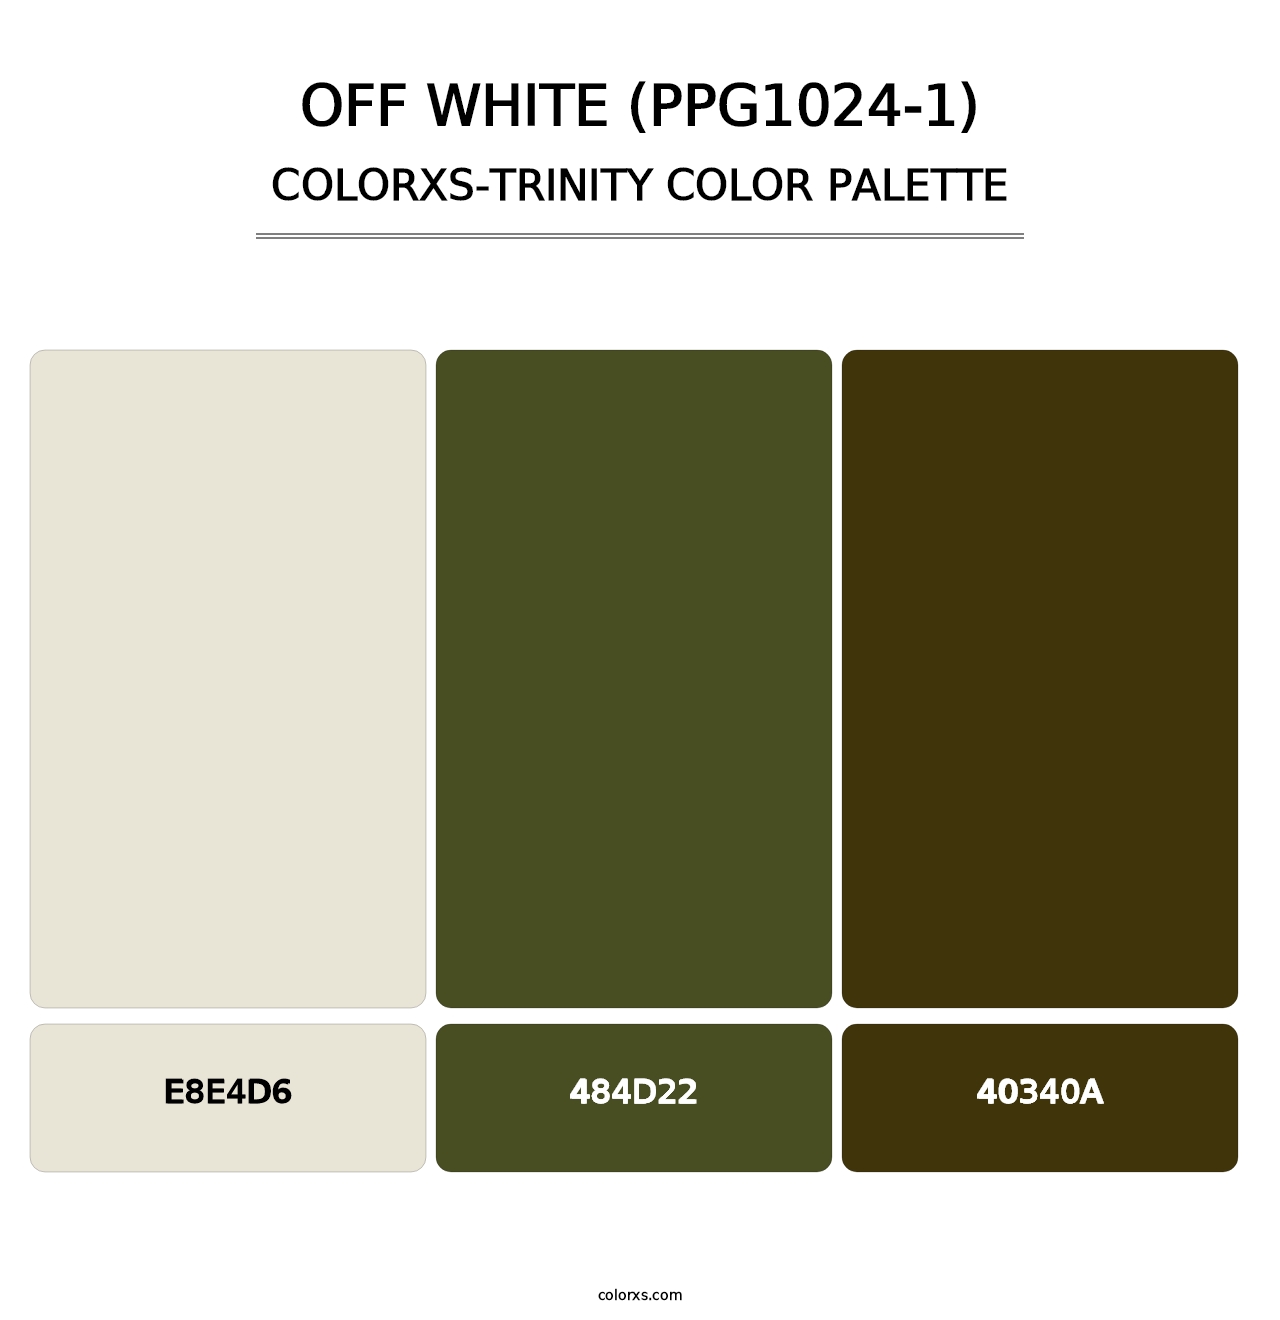 Off White (PPG1024-1) - Colorxs Trinity Palette